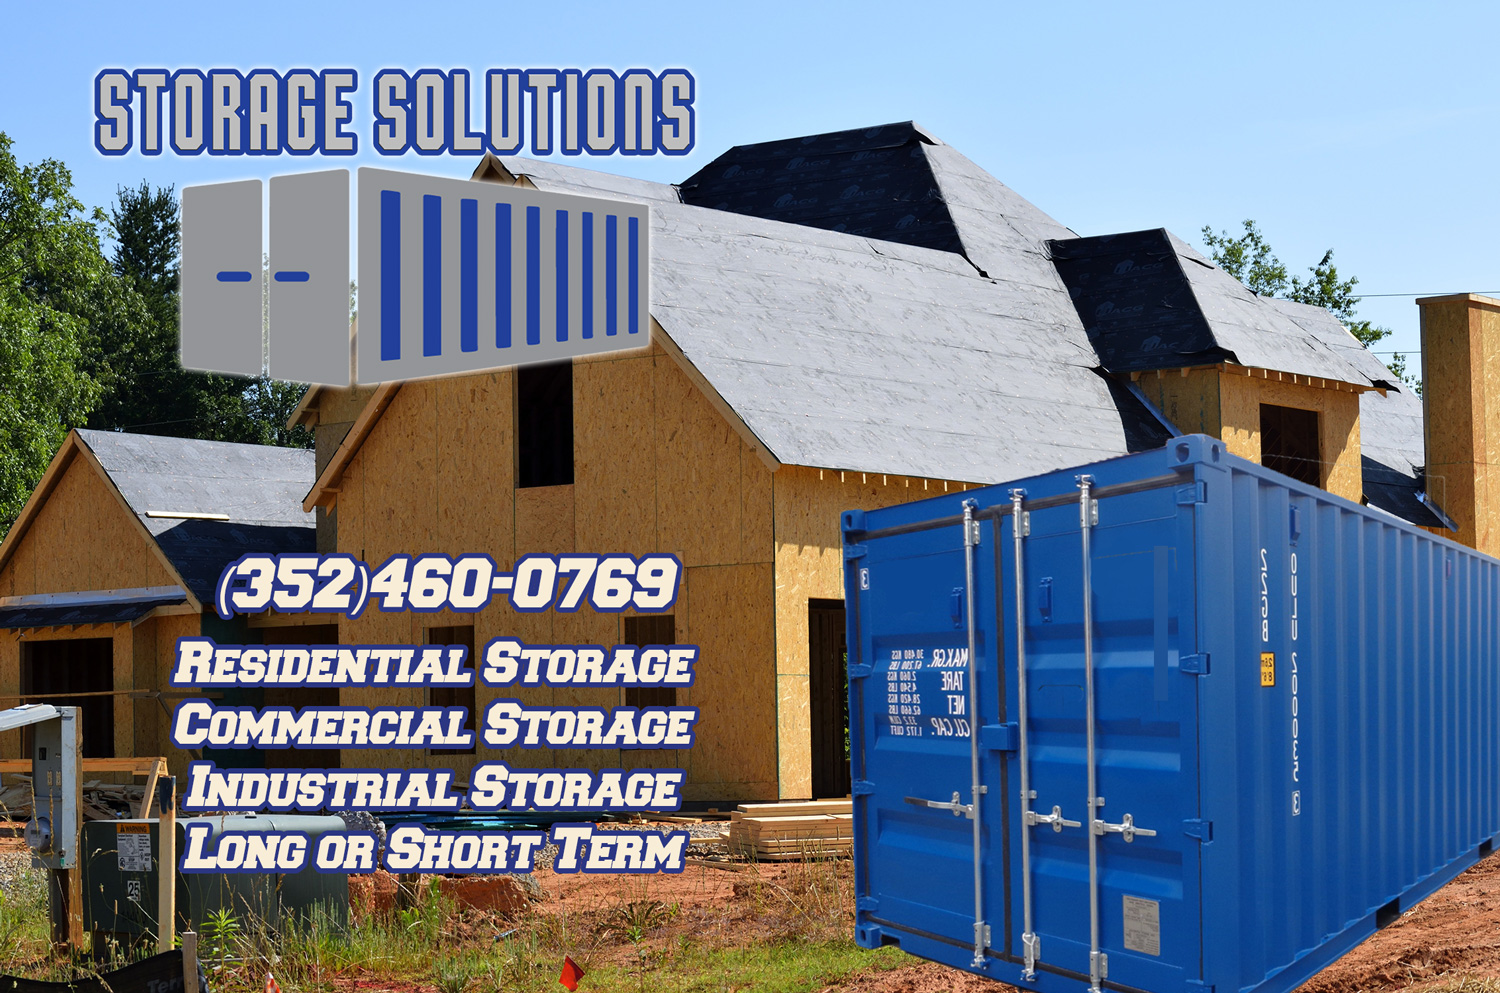 https://storagesolutiongroup.com/wp-content/uploads/2021/03/PODS-MObile-Mini-Type-Storage-Containers-for-Residential-and-Commercial-Construction-site-Storage-Okahumpka-Leesburg-Mt-Dora-Eustis-Umatilla-Whitney-Clermont-Ocala-The-Villages-Belleview.jpg